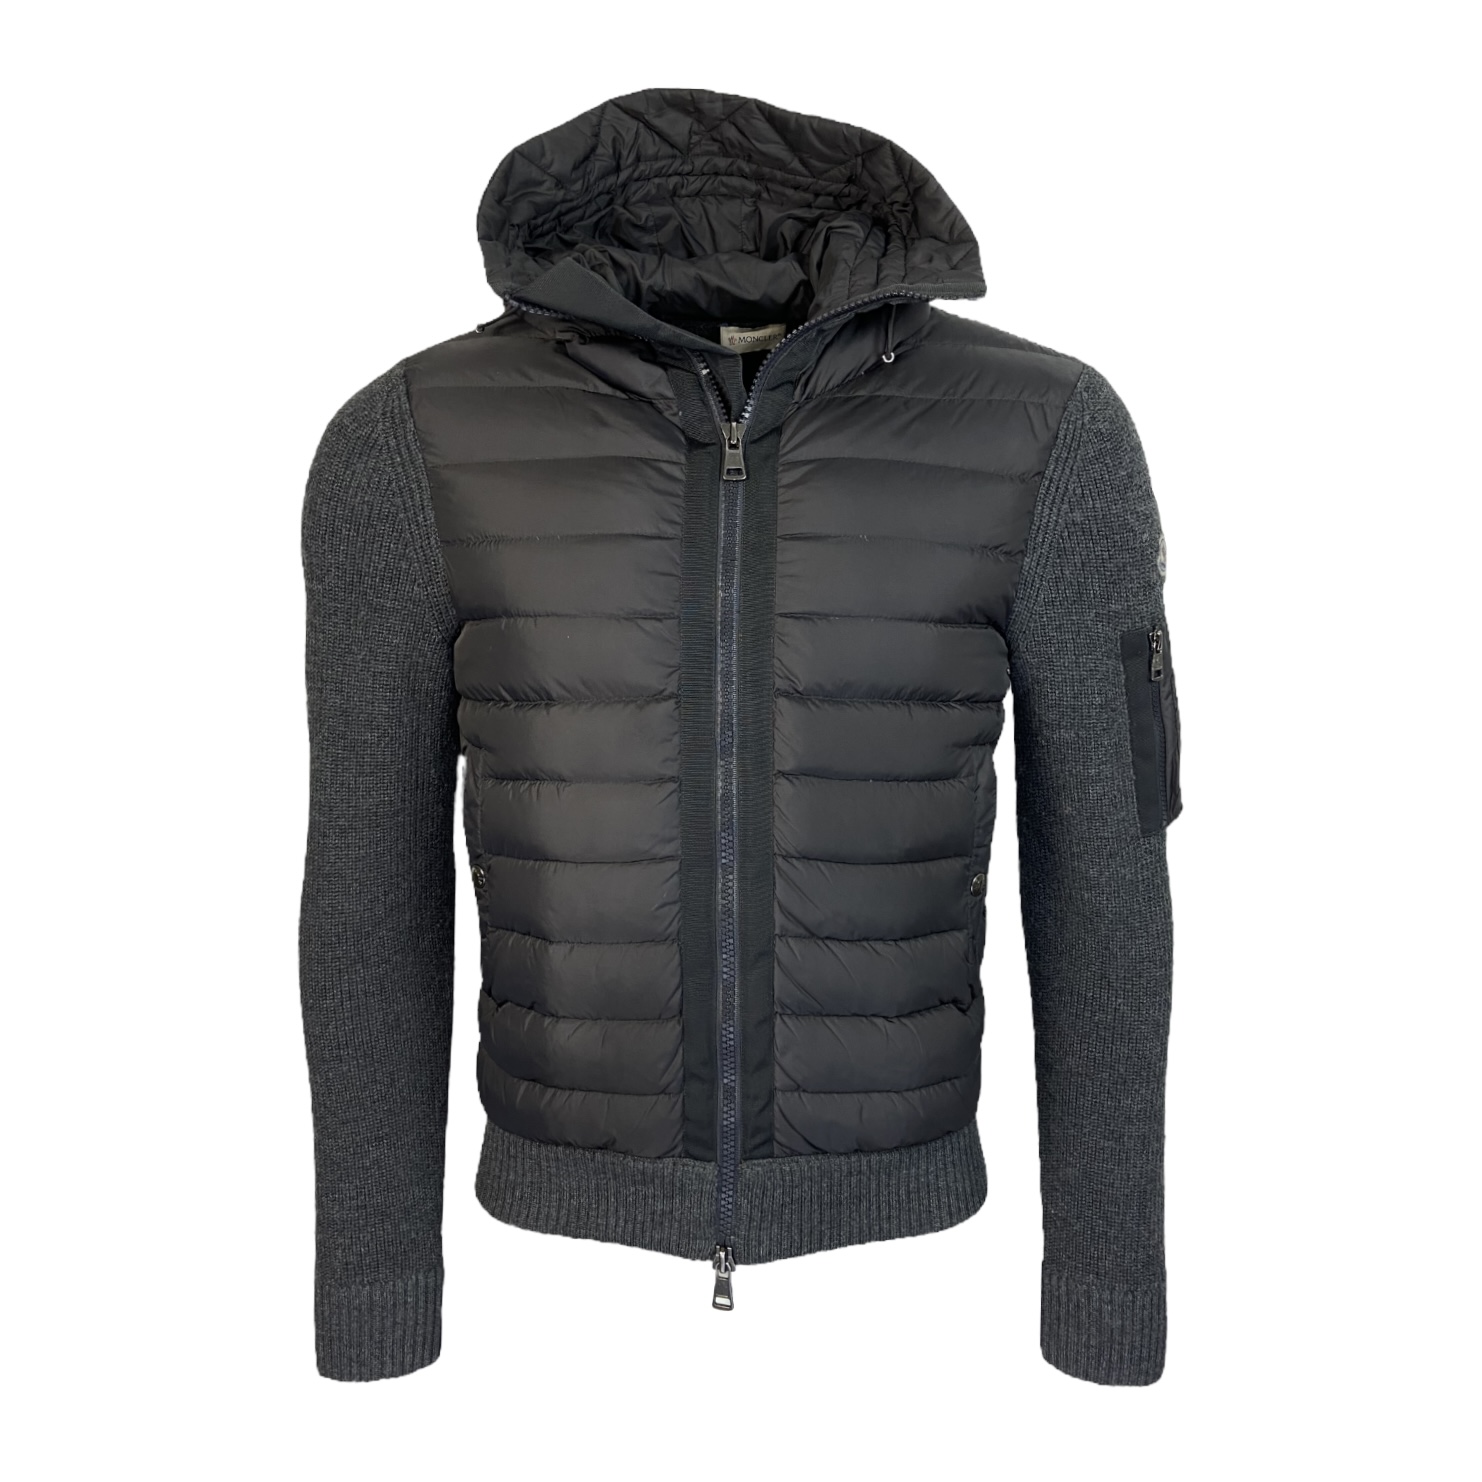 Moncler Hooded Down Cardigan - Size M (Fits S)